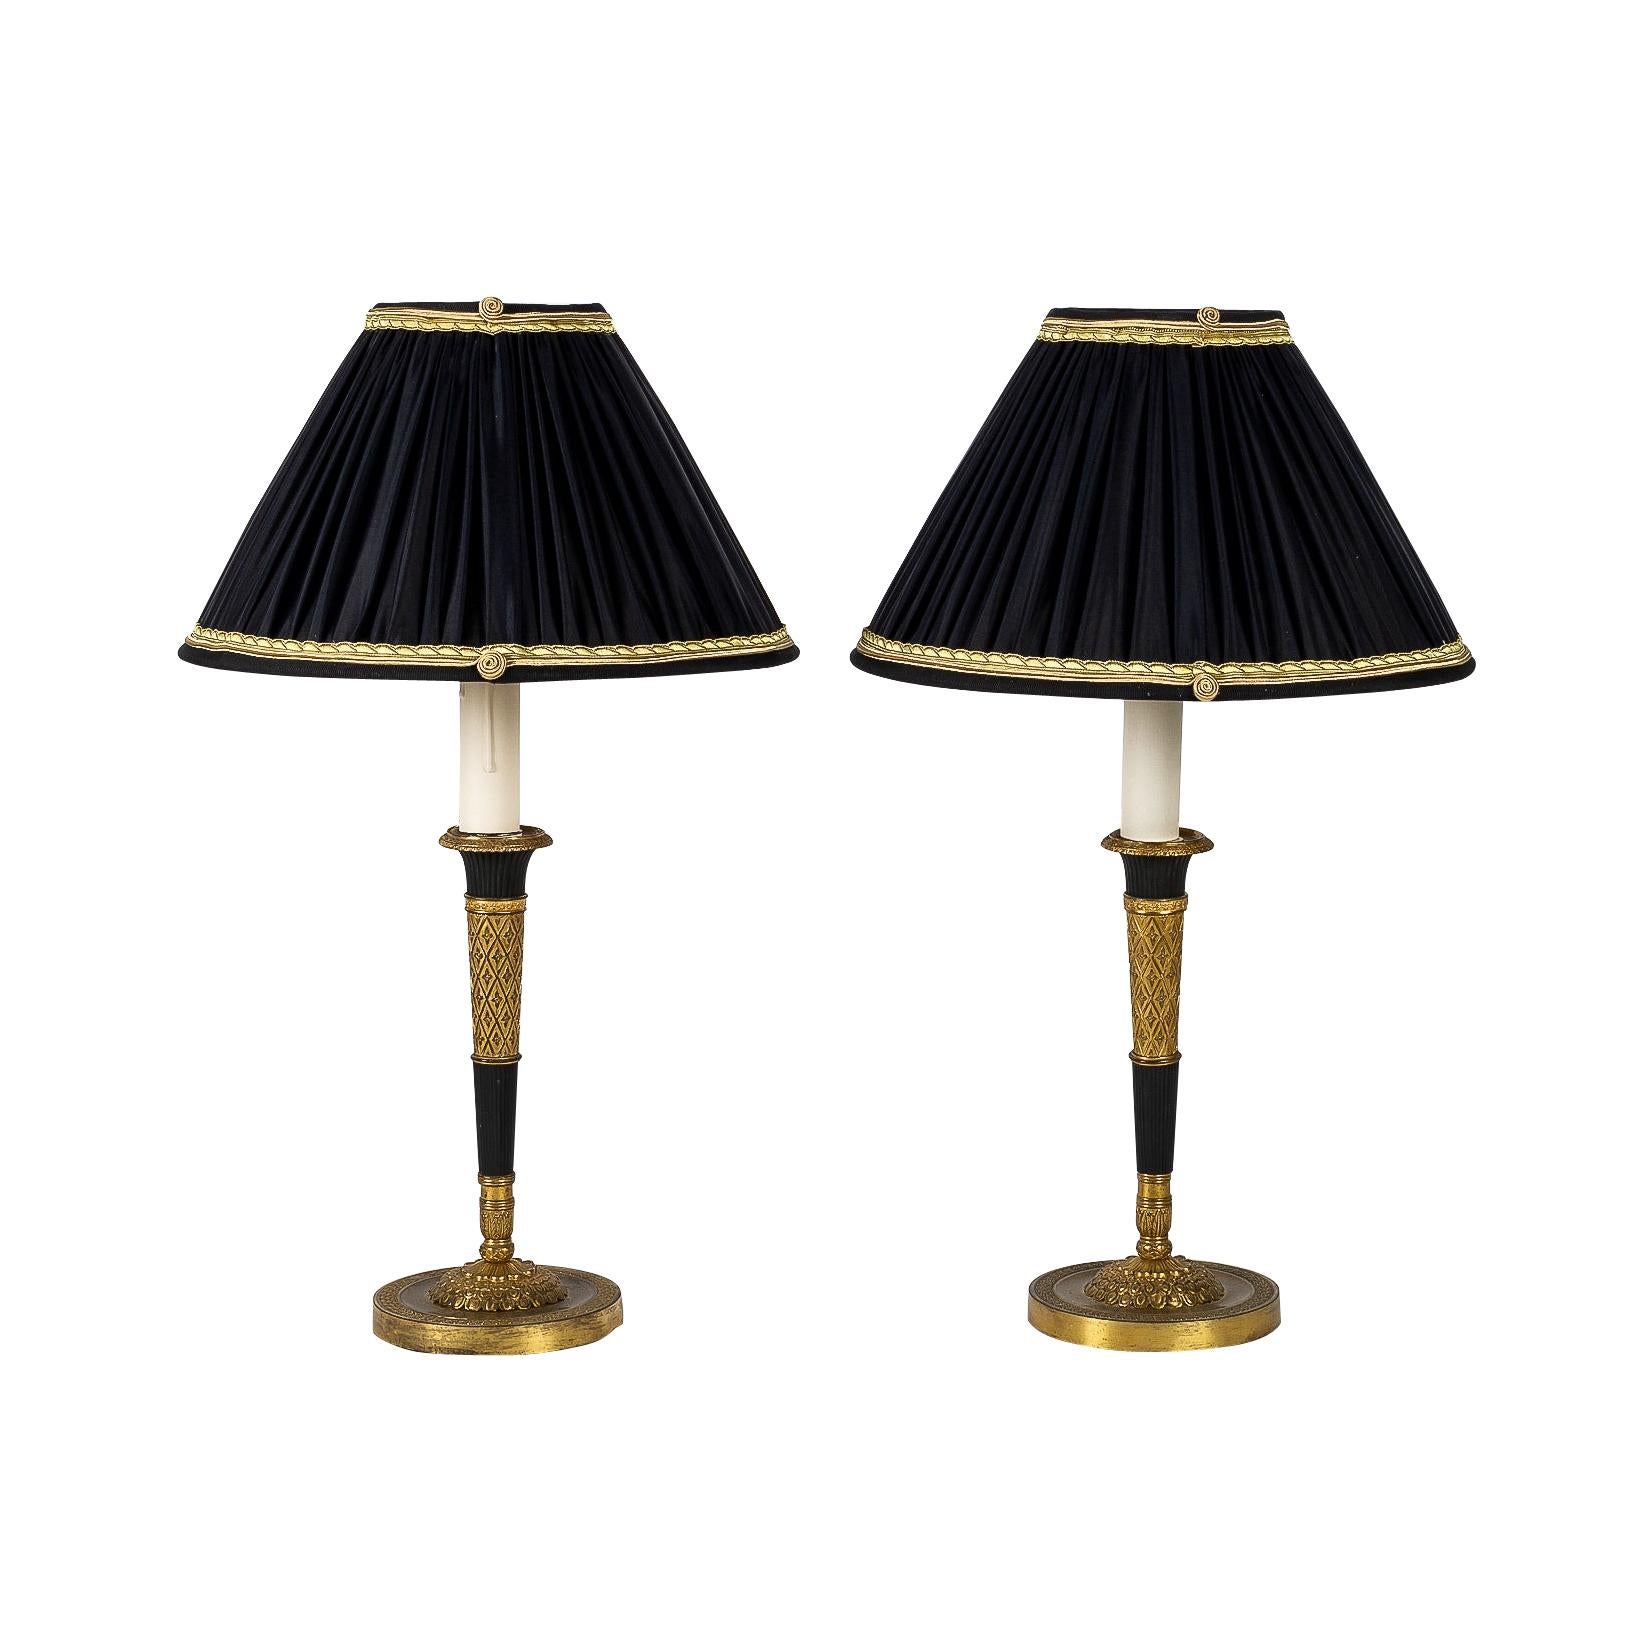 French Directoire Period Pair of French Candlesticks Converted in Table-Lamps